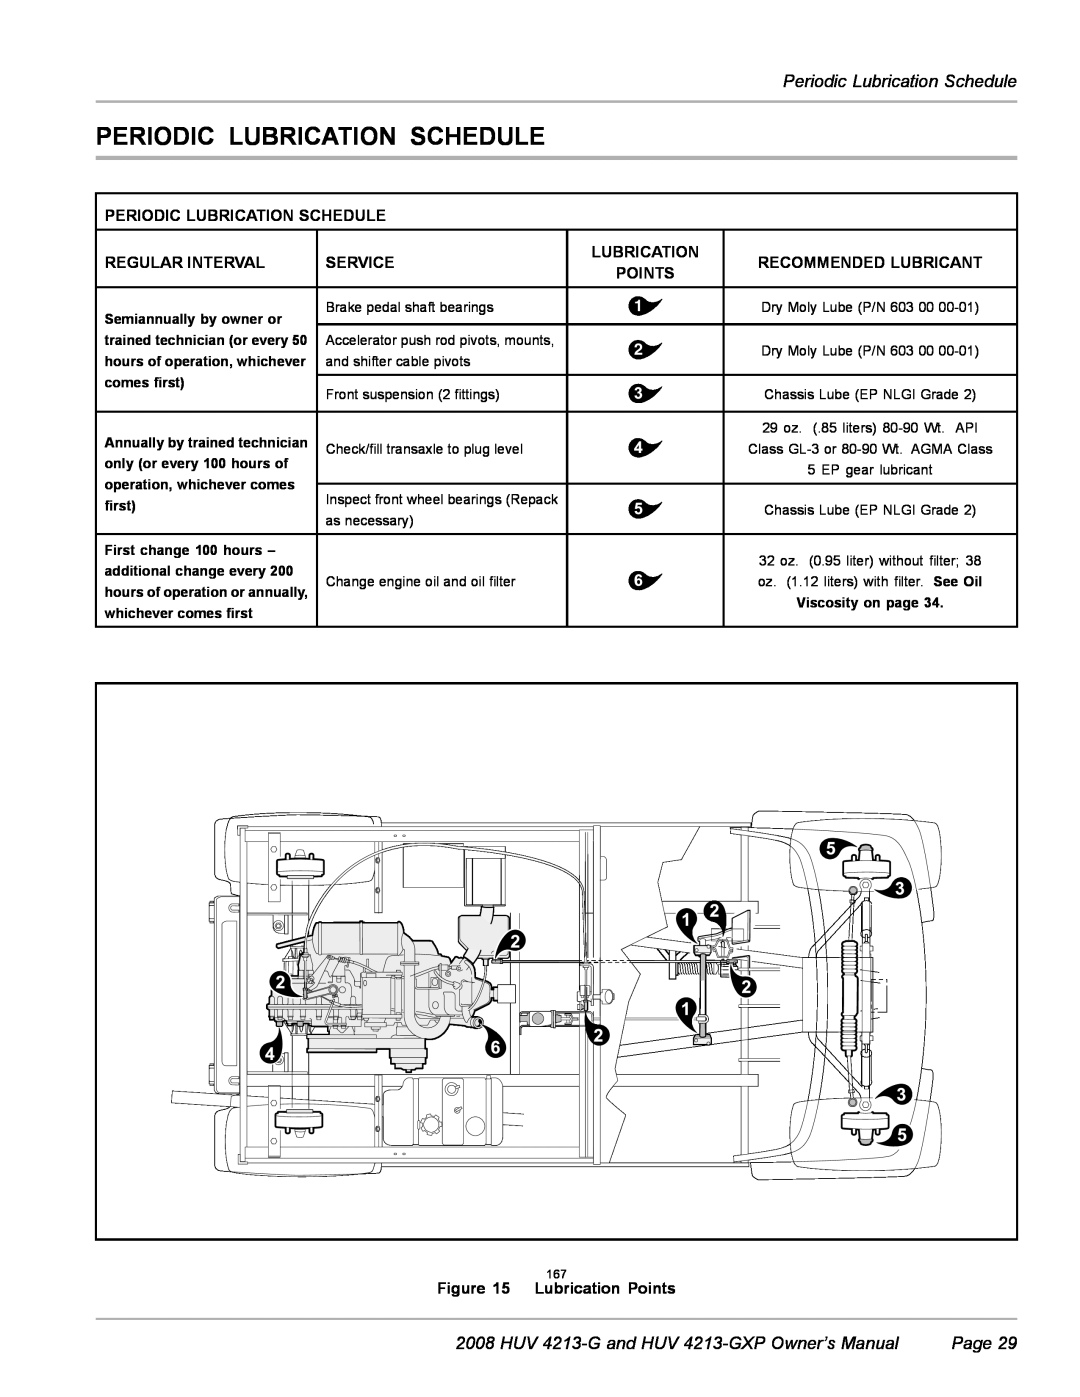 Husqvarna HUV 4213-GXP owner manual Periodic Lubrication Schedule, Regular Interval, Service, Recommended Lubricant, Points 